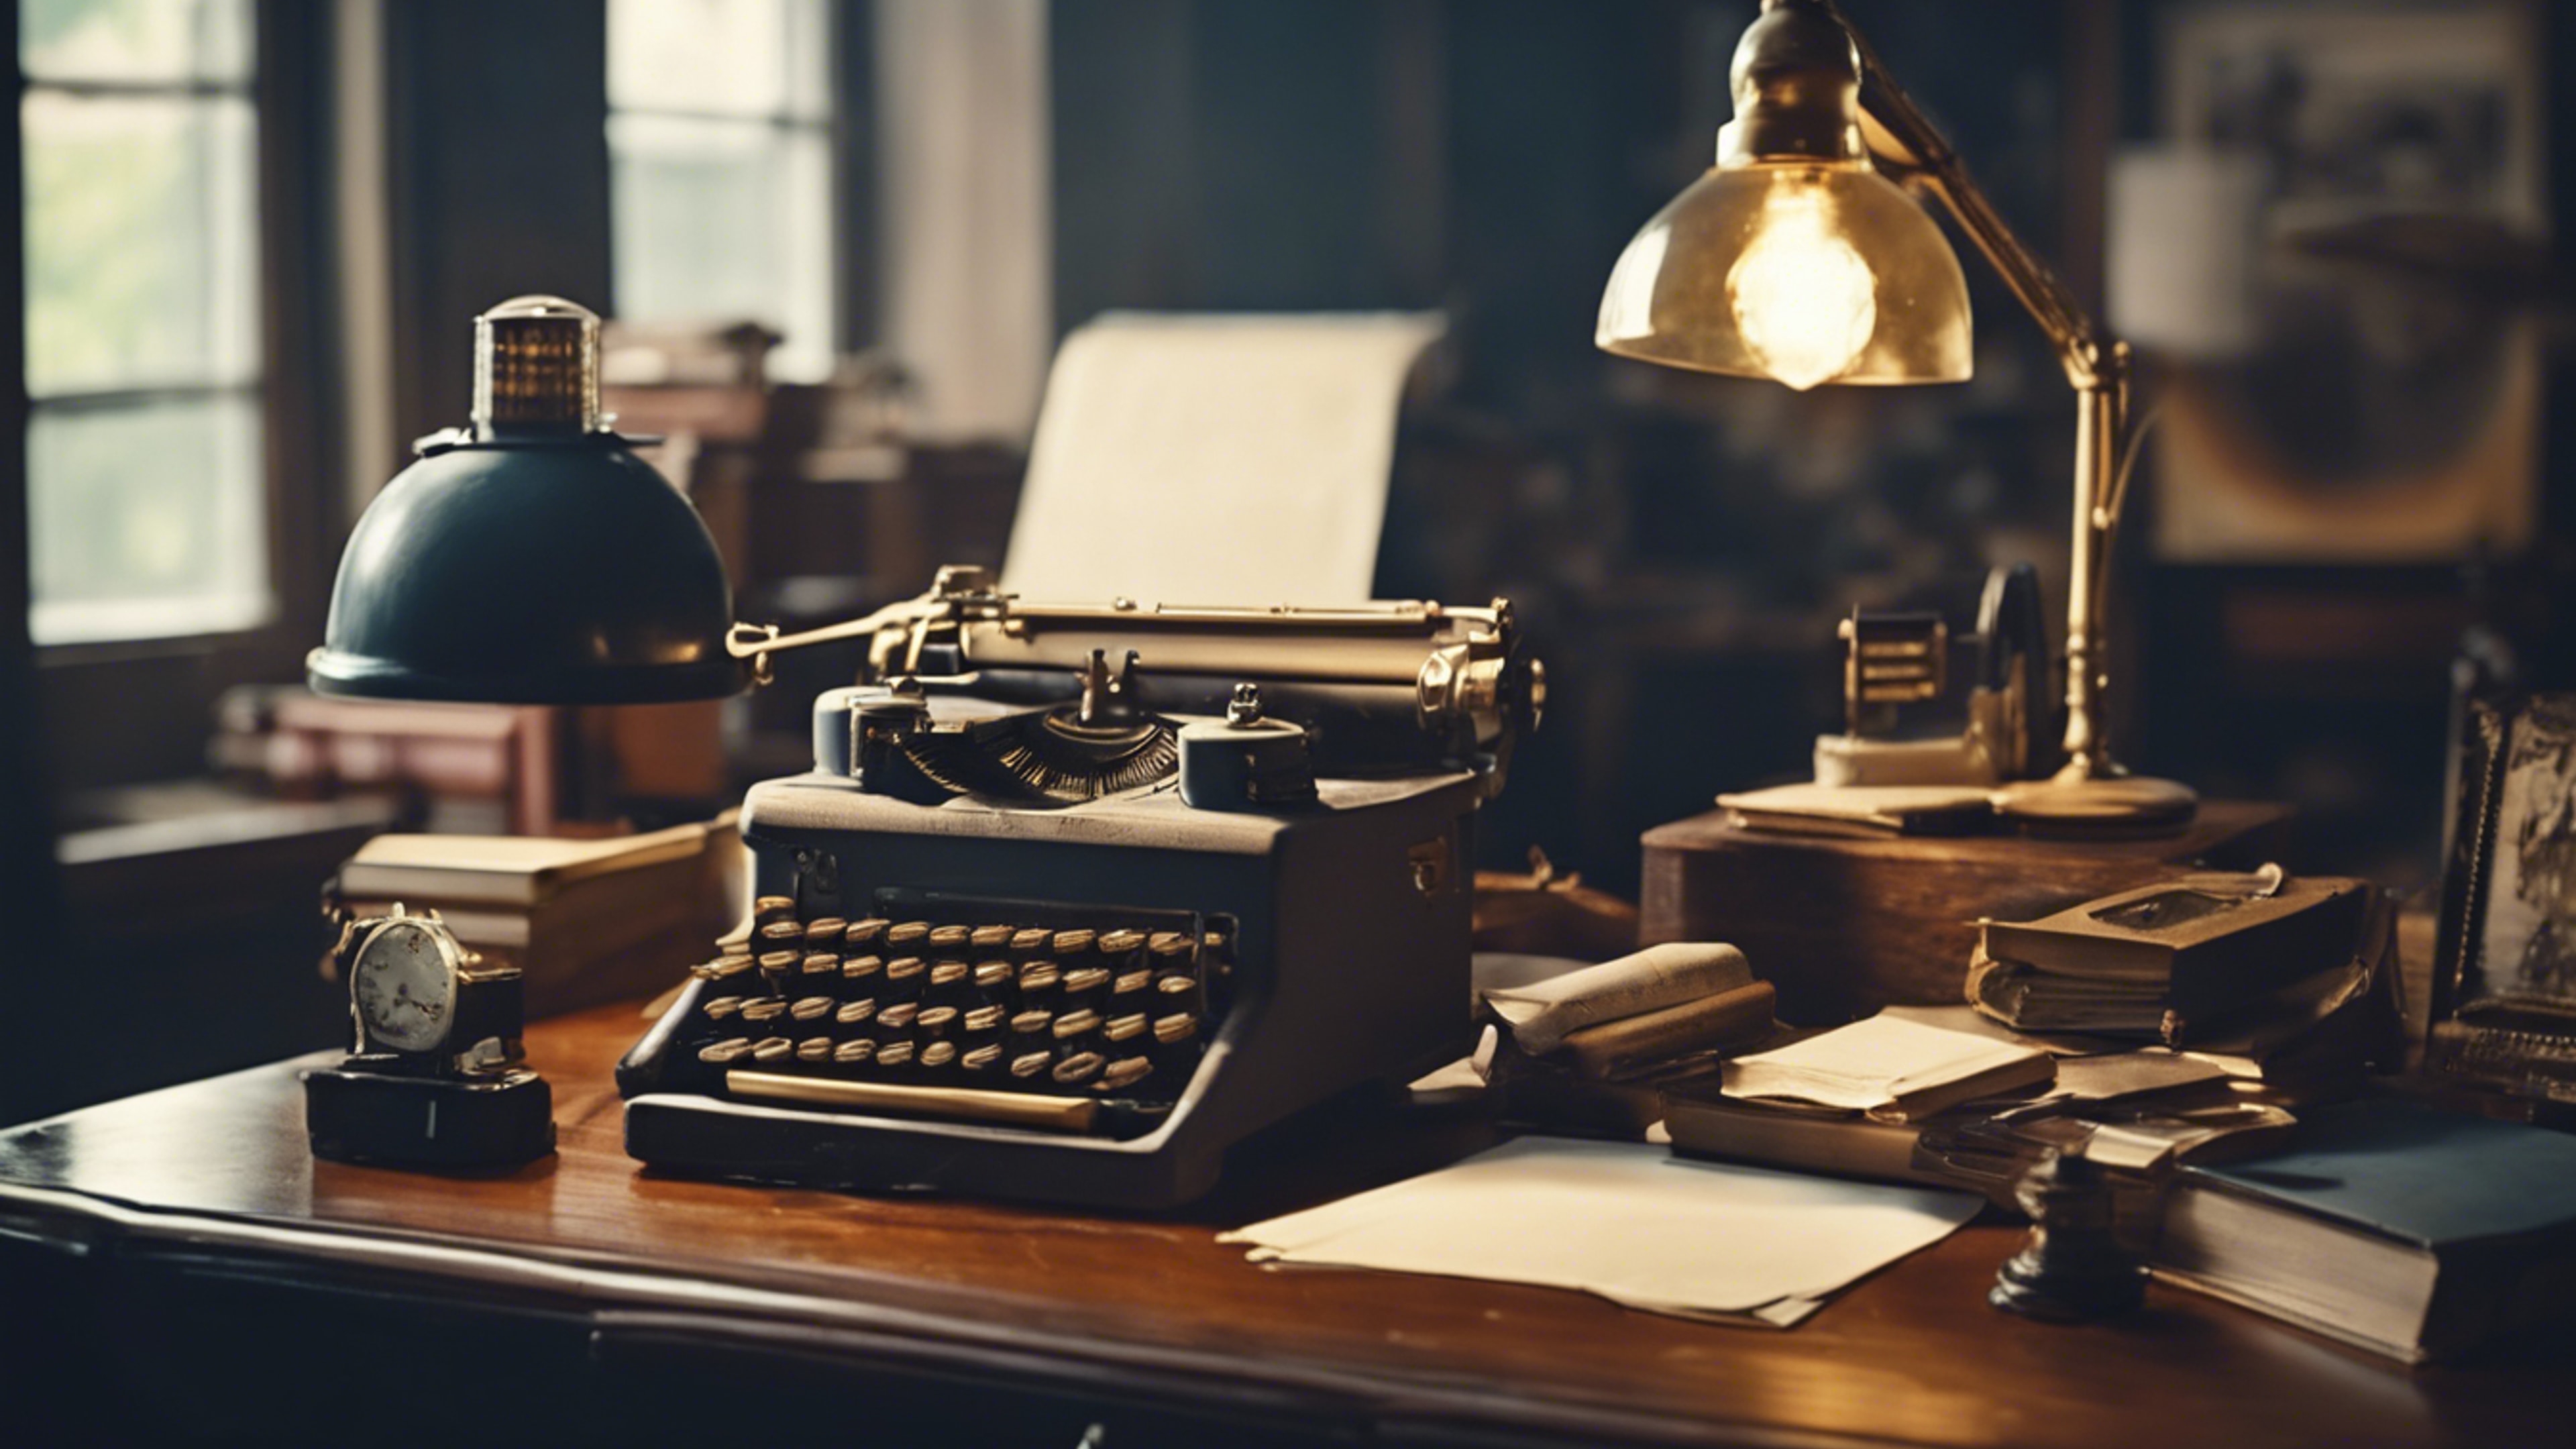 An old-fashioned navy office with a wooden desk, a typwriter and a vintage lamp. Дэлгэцийн зураг[8cb58867731e4823a50e]